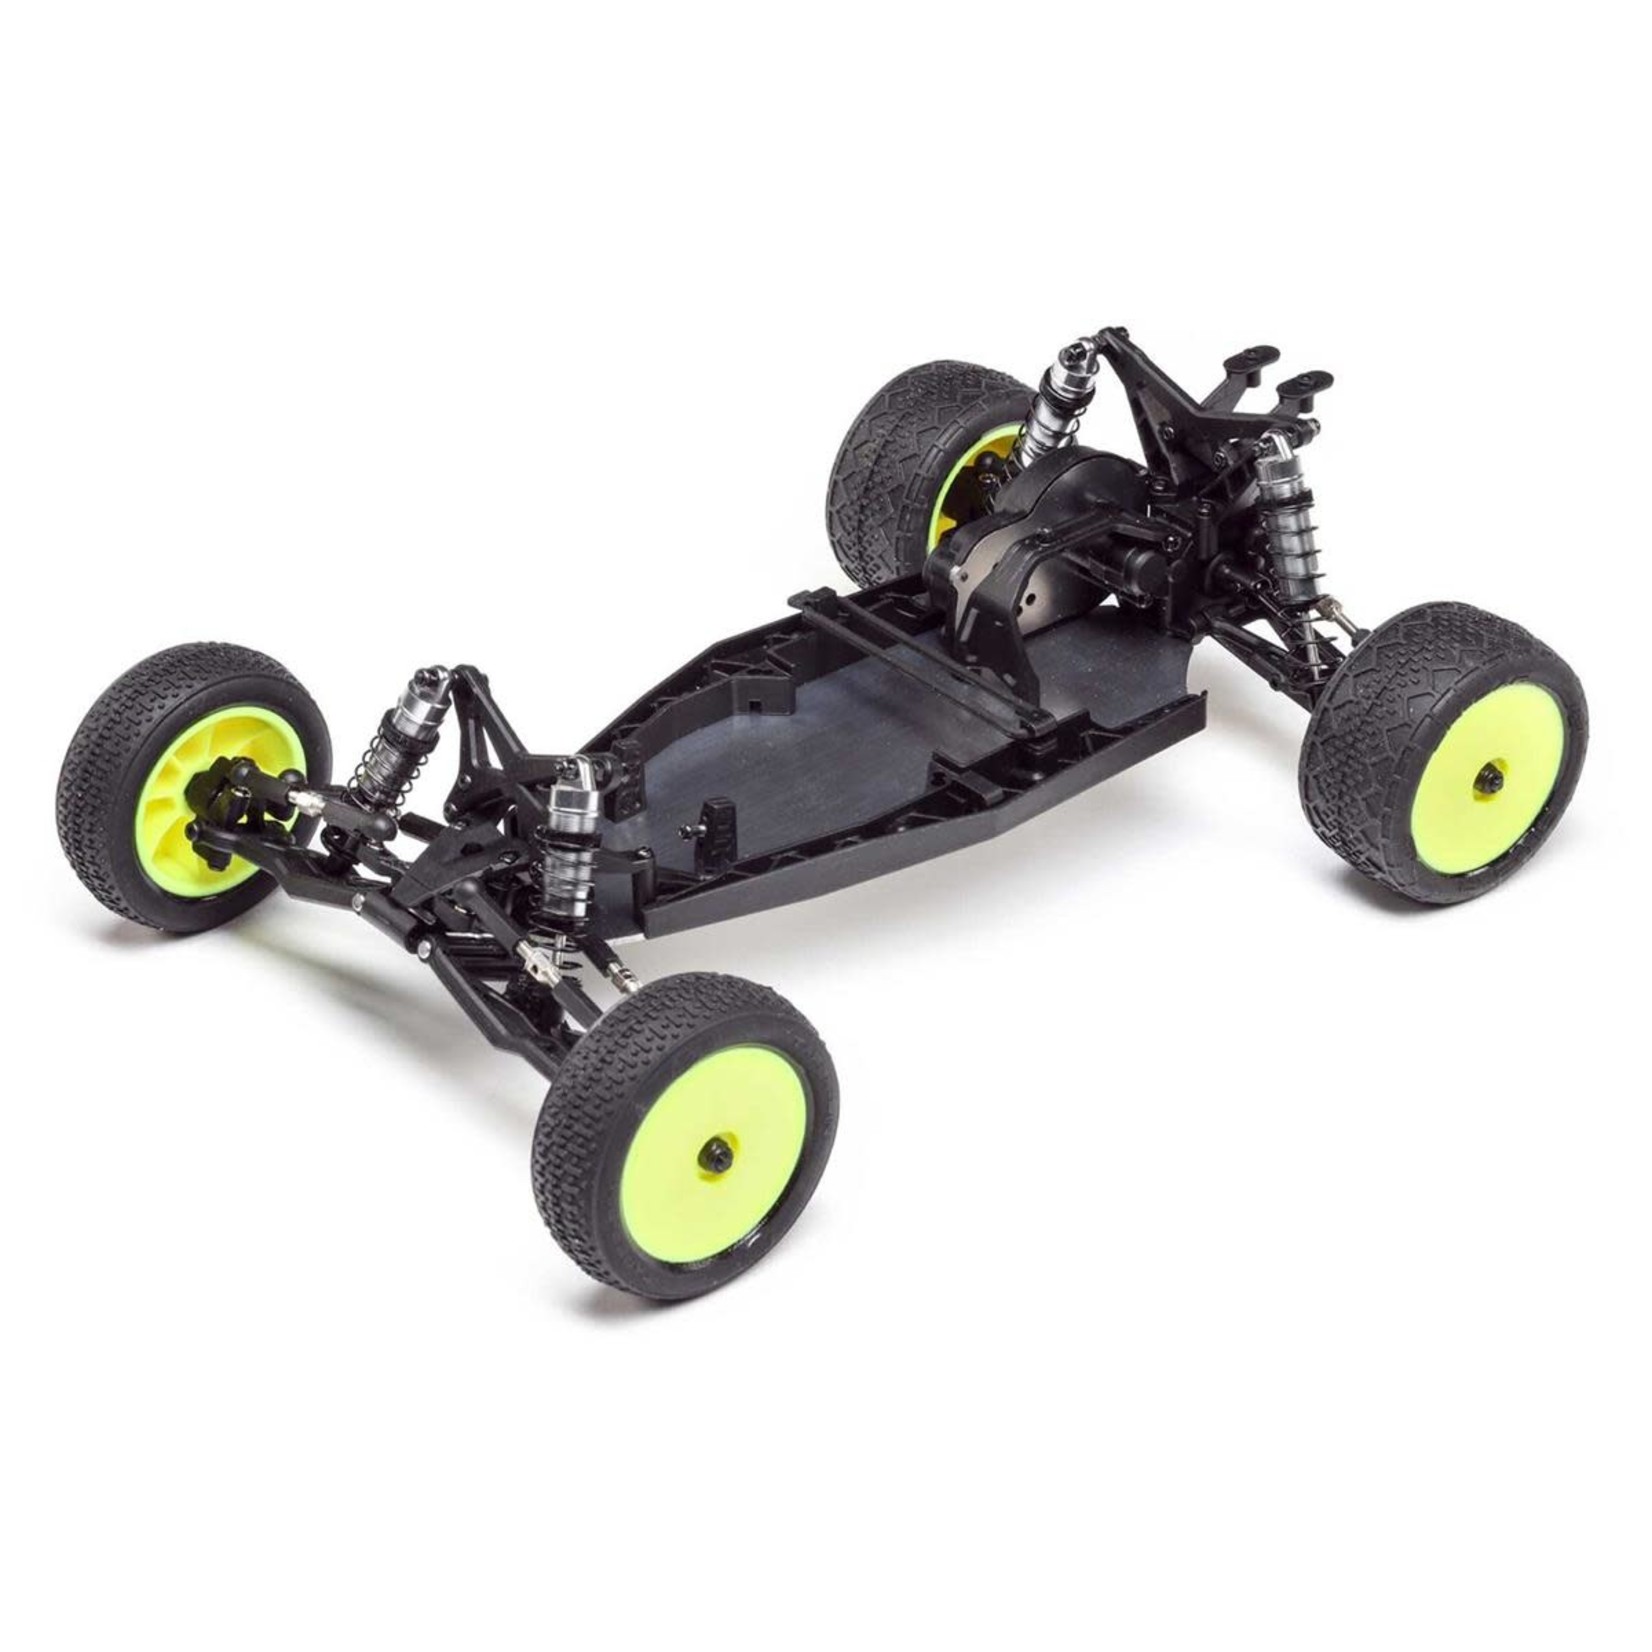 Losi Losi Mini-B 1/16 Pro 2WD Buggy Roller Kit (Clear) #LOS01025